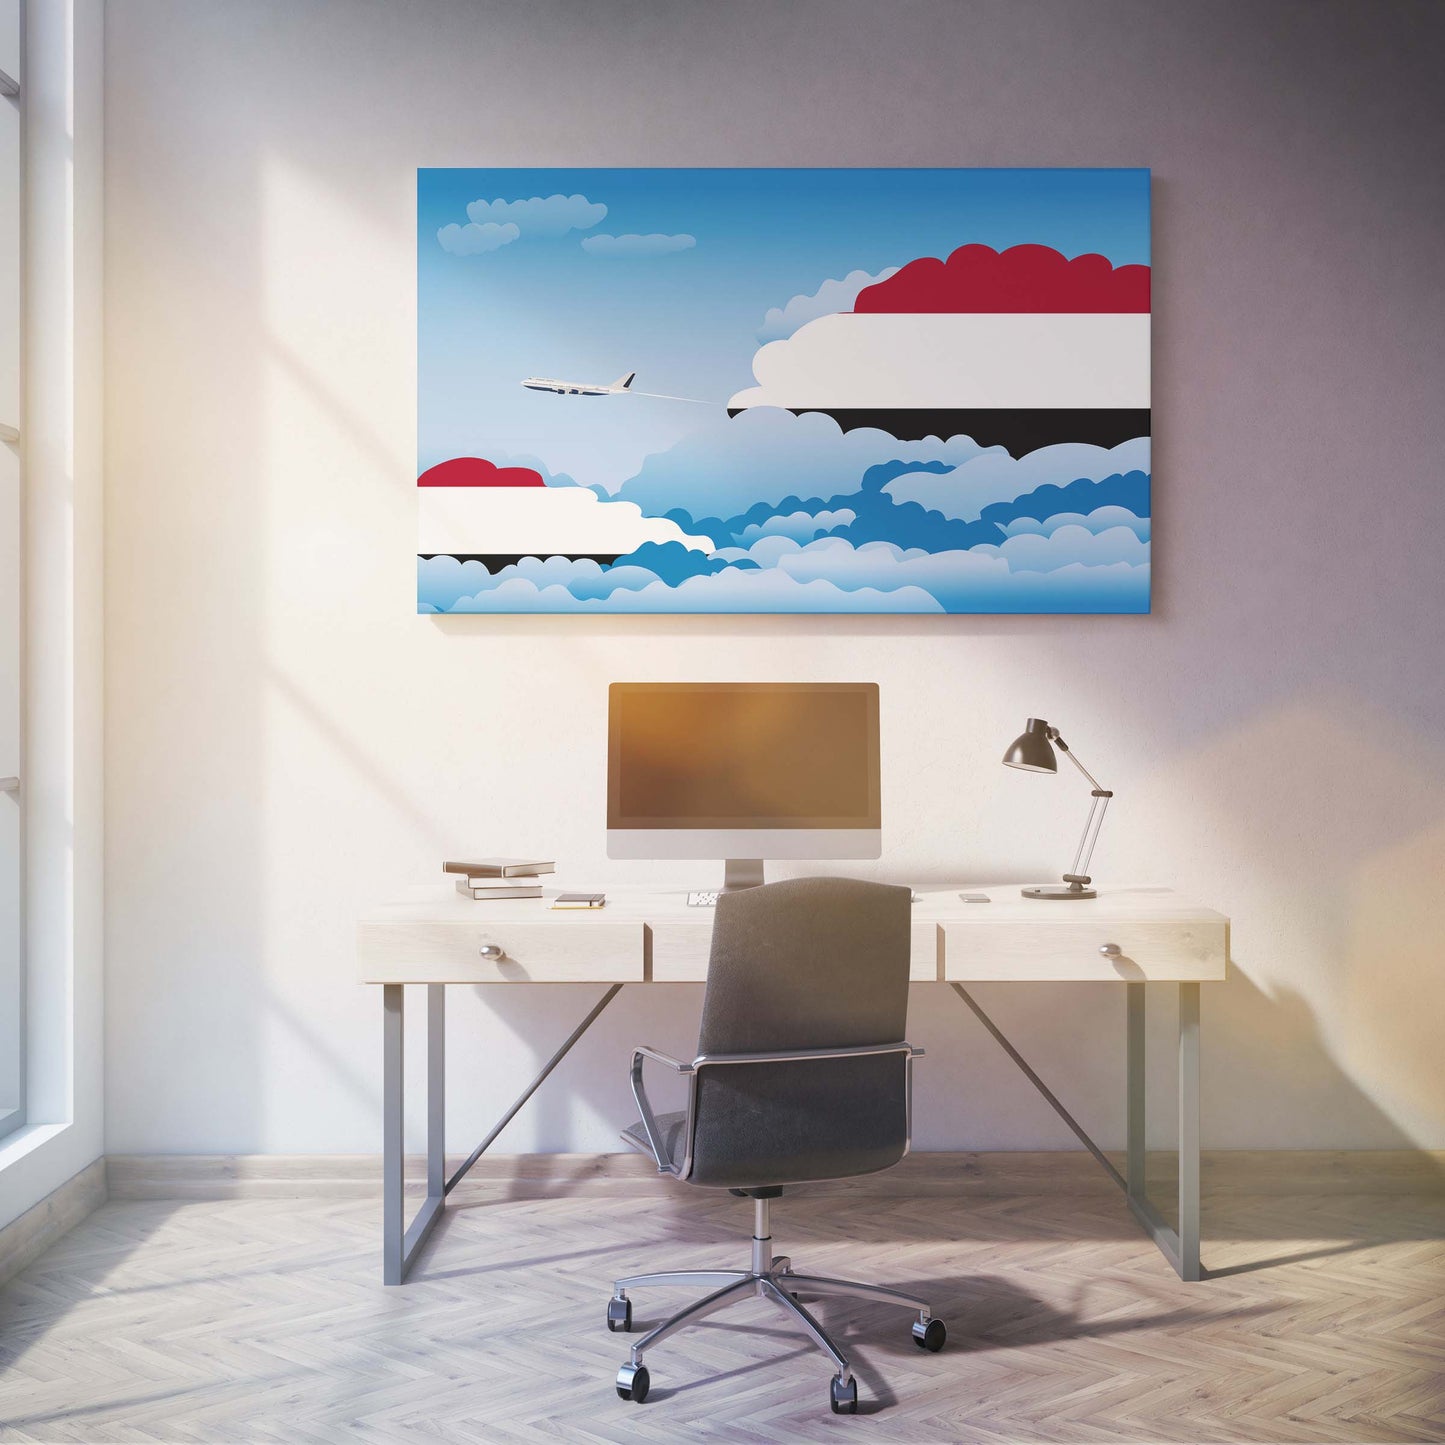 Yemen Flags Day Clouds Canvas Print Framed